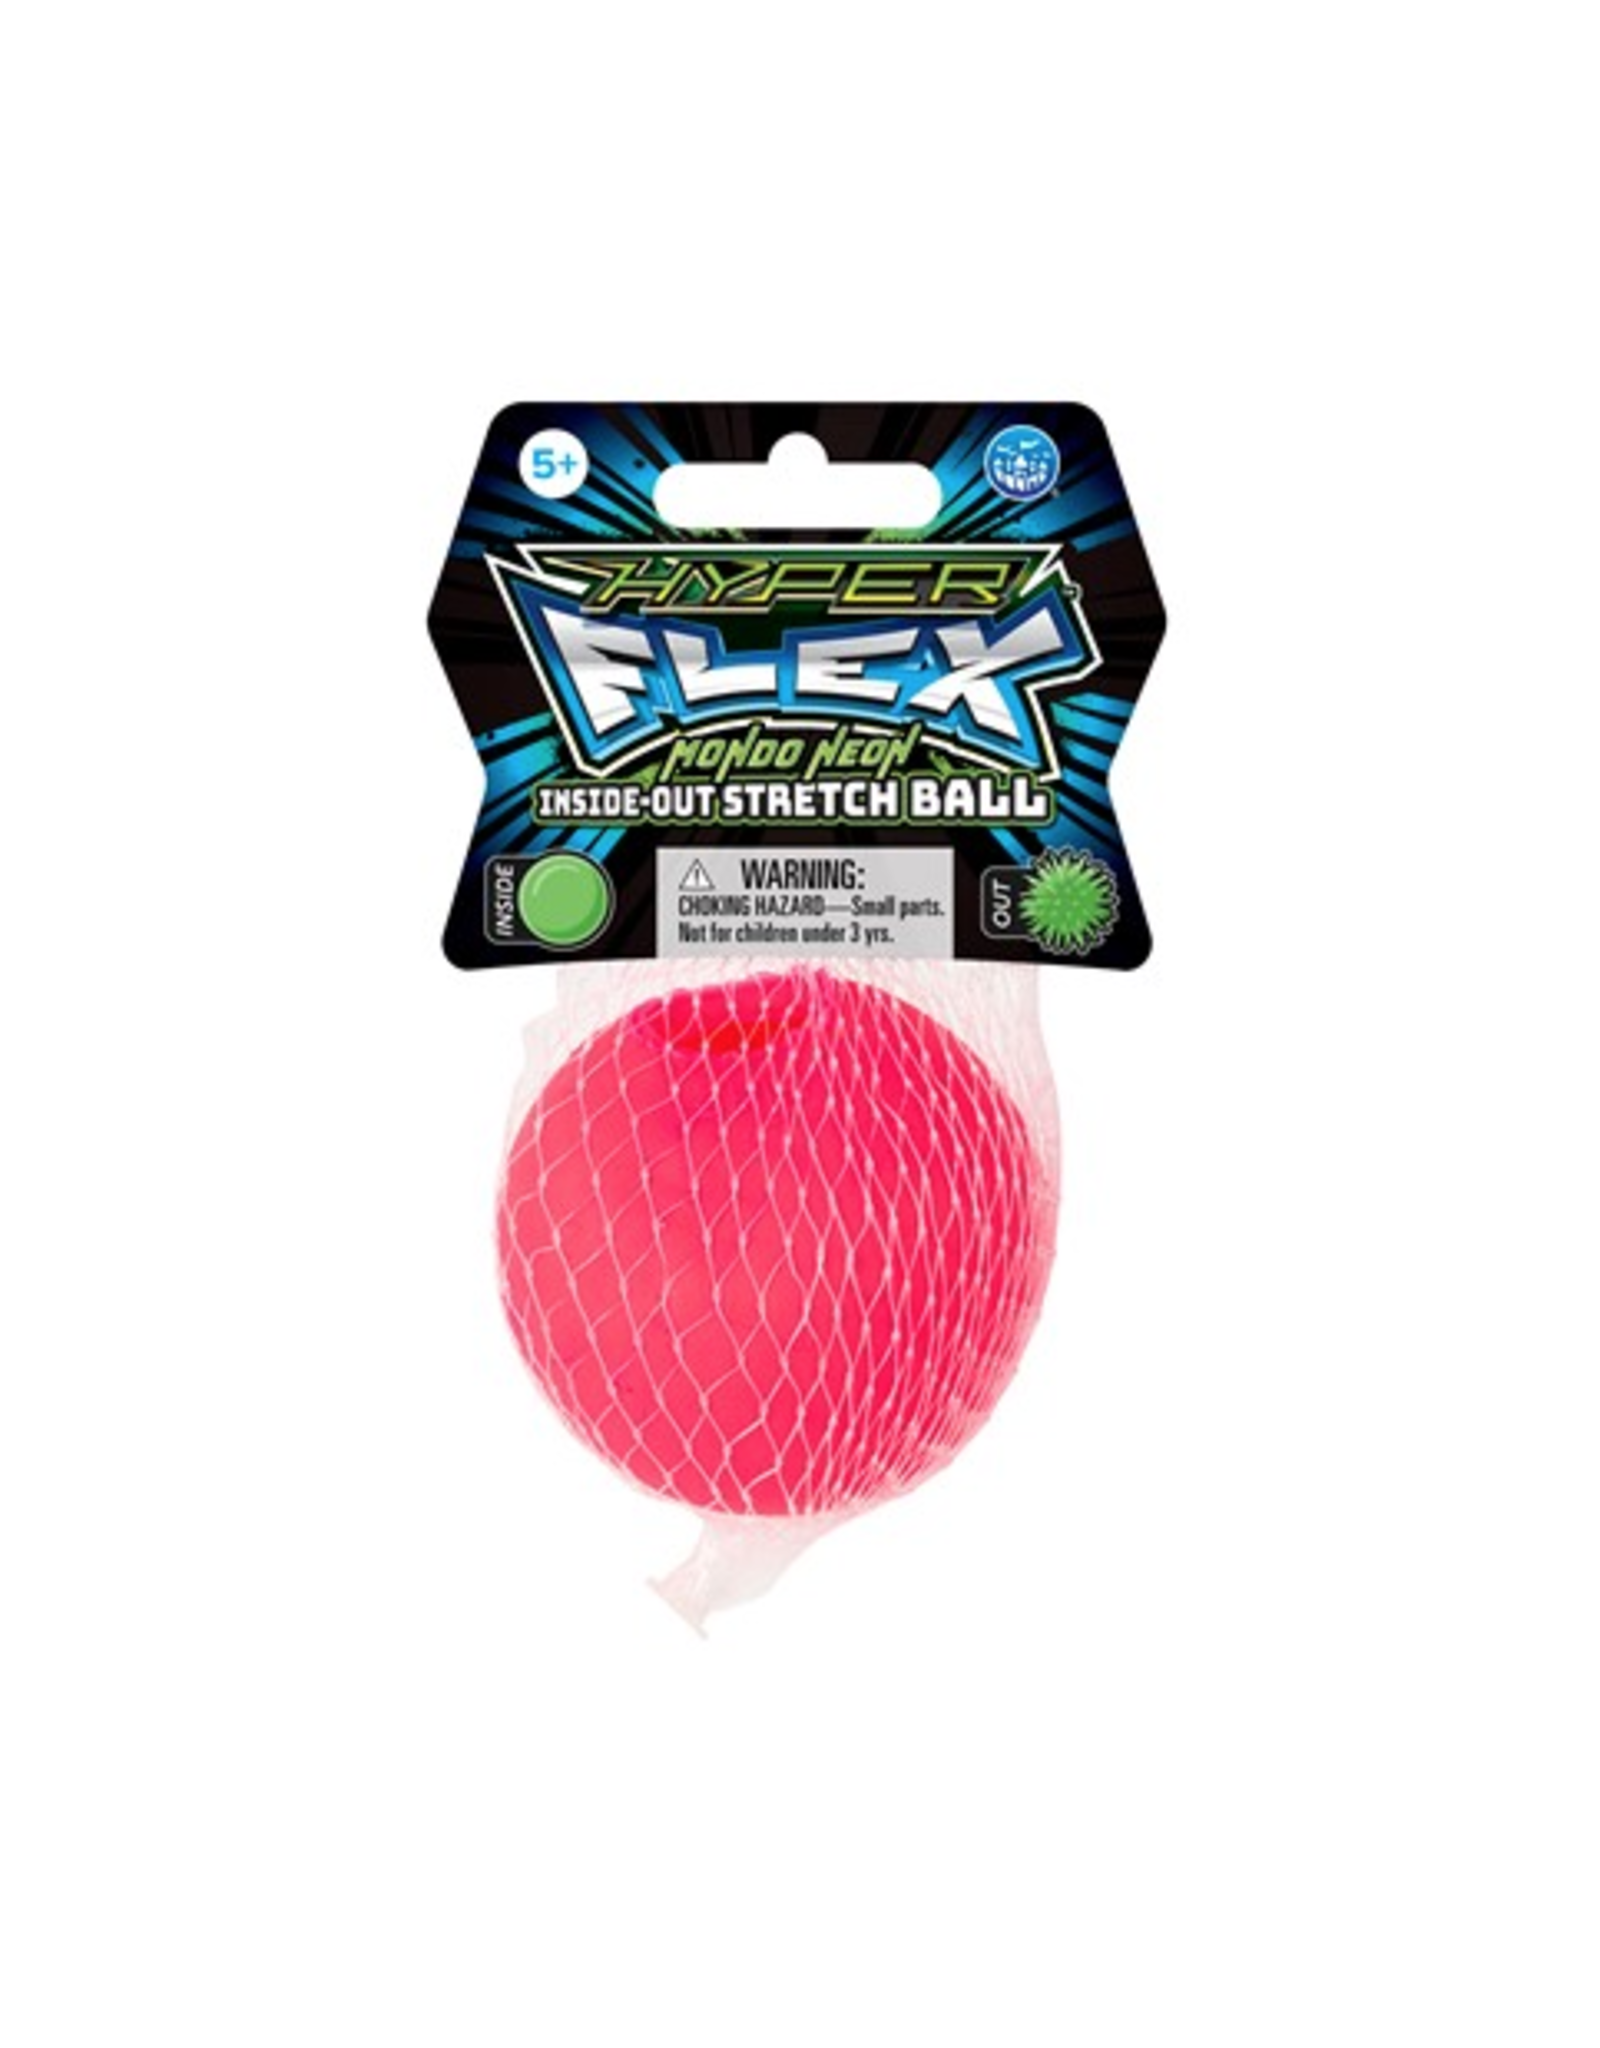 Play Visions MONDO Neon Inside-Out Ball